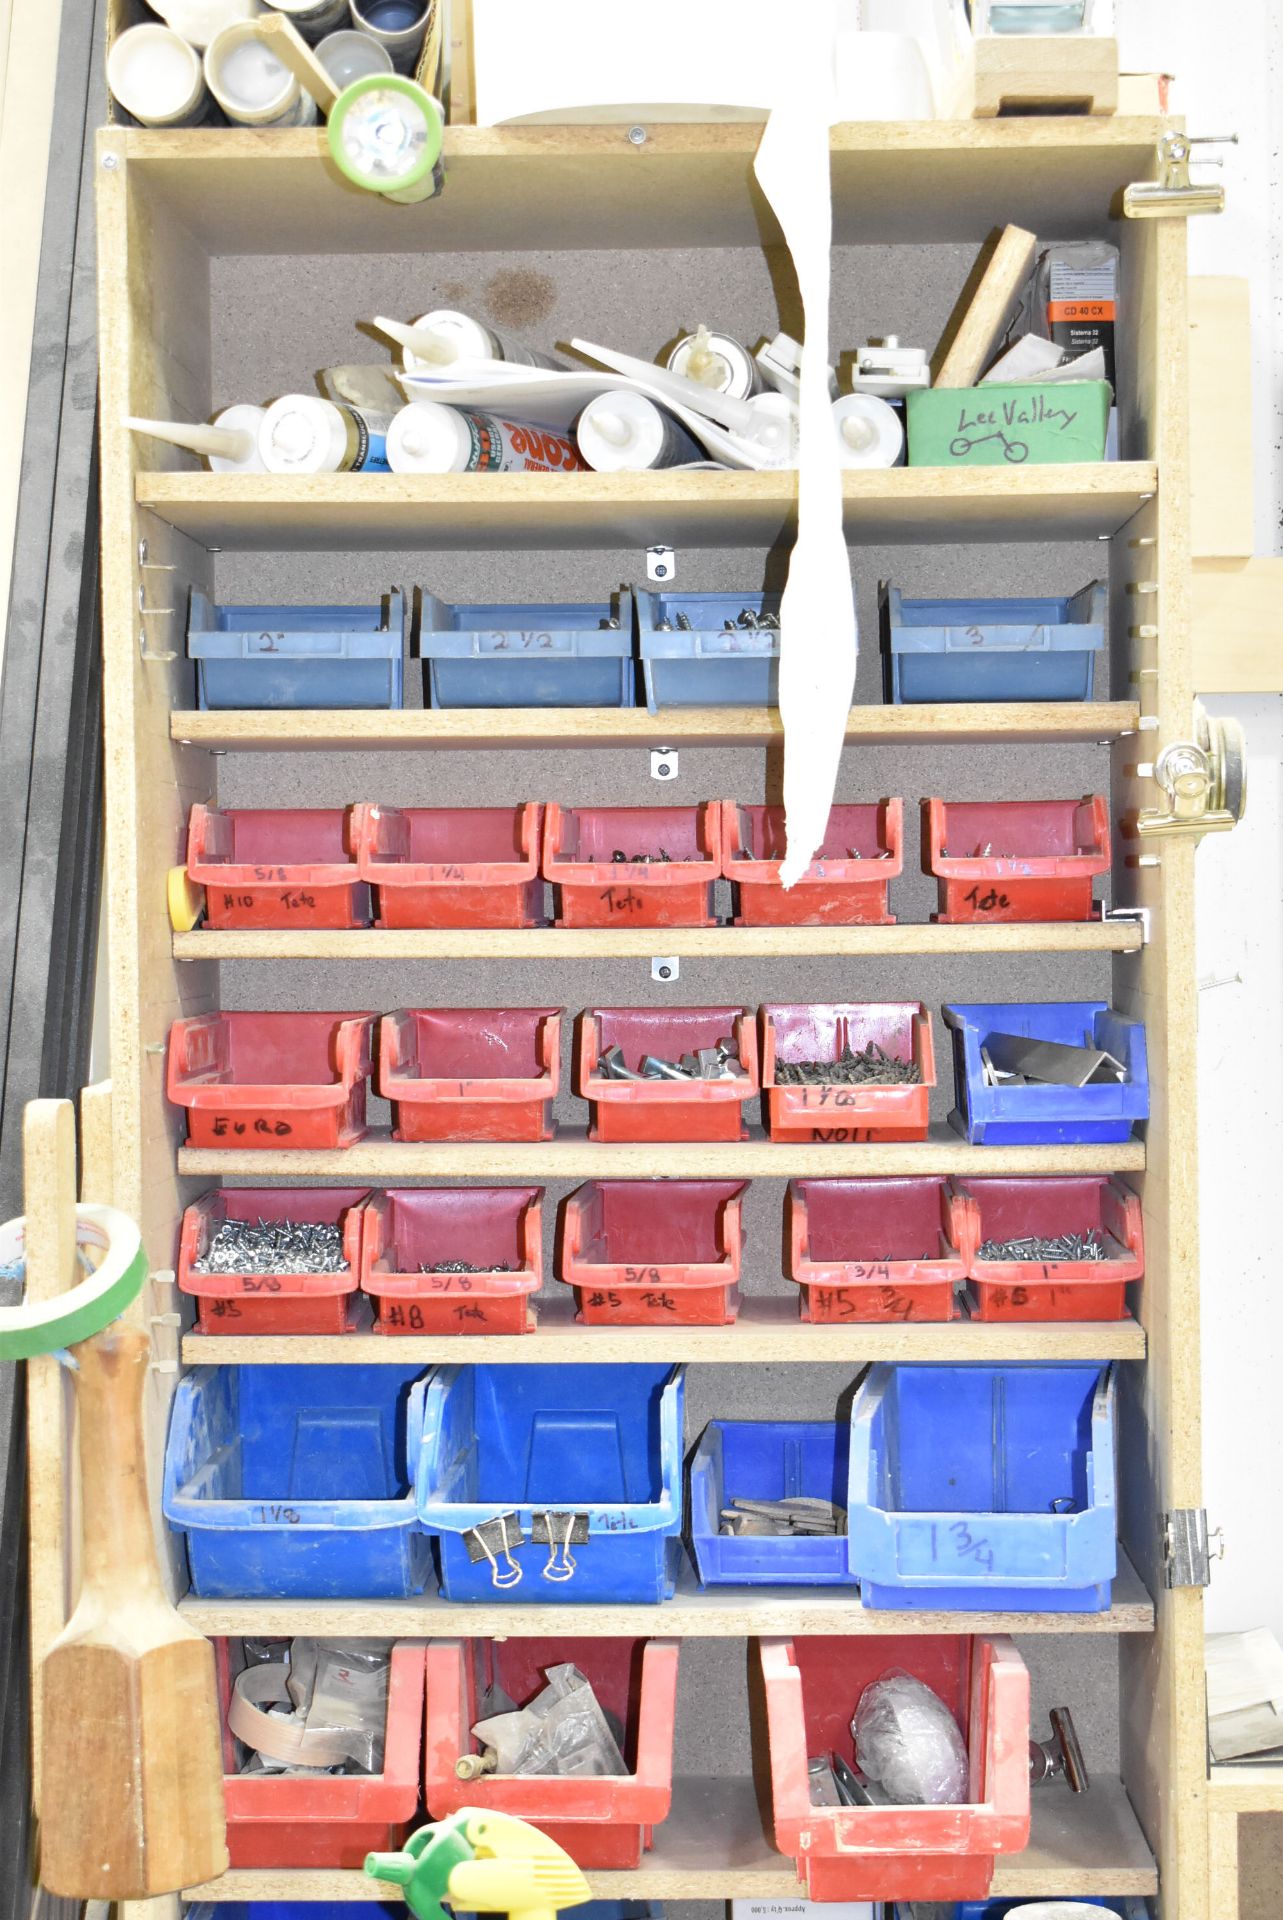 LOT/ CONTENTS ALONG WALL CONSISTING OF WORKBENCHES, TOOLS, HARDWARE, WOOD TRIM AND PANELS [RIGGING - Image 8 of 12